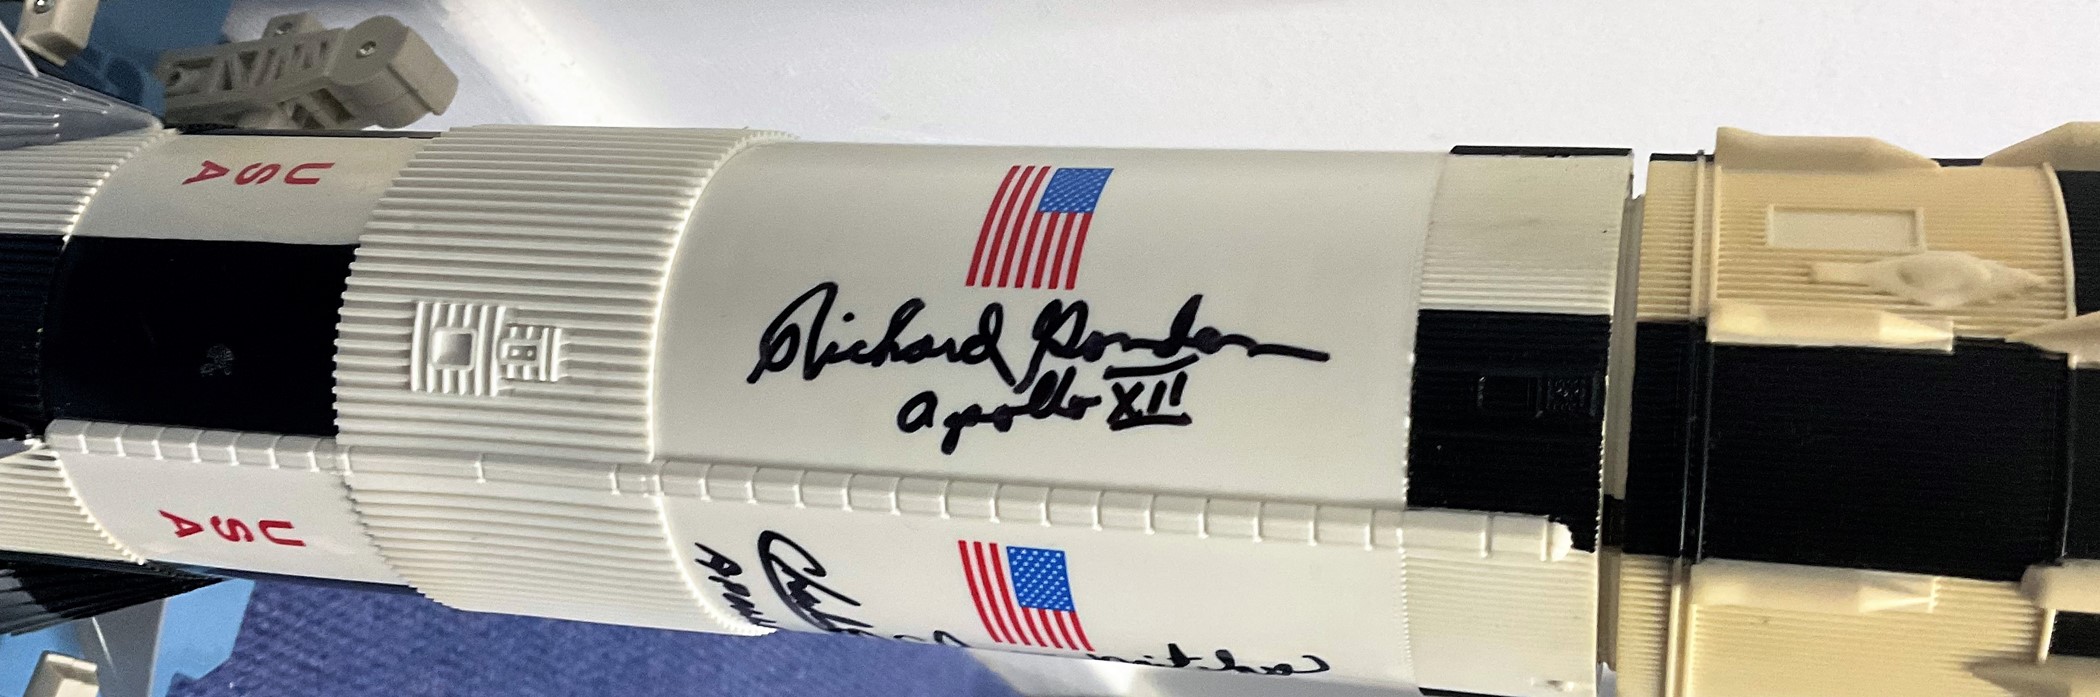 Space Voyagers Saturn 5 rocket model multi signed by Nasa astronauts Charles Drake, Ed Mitchell, - Image 4 of 7